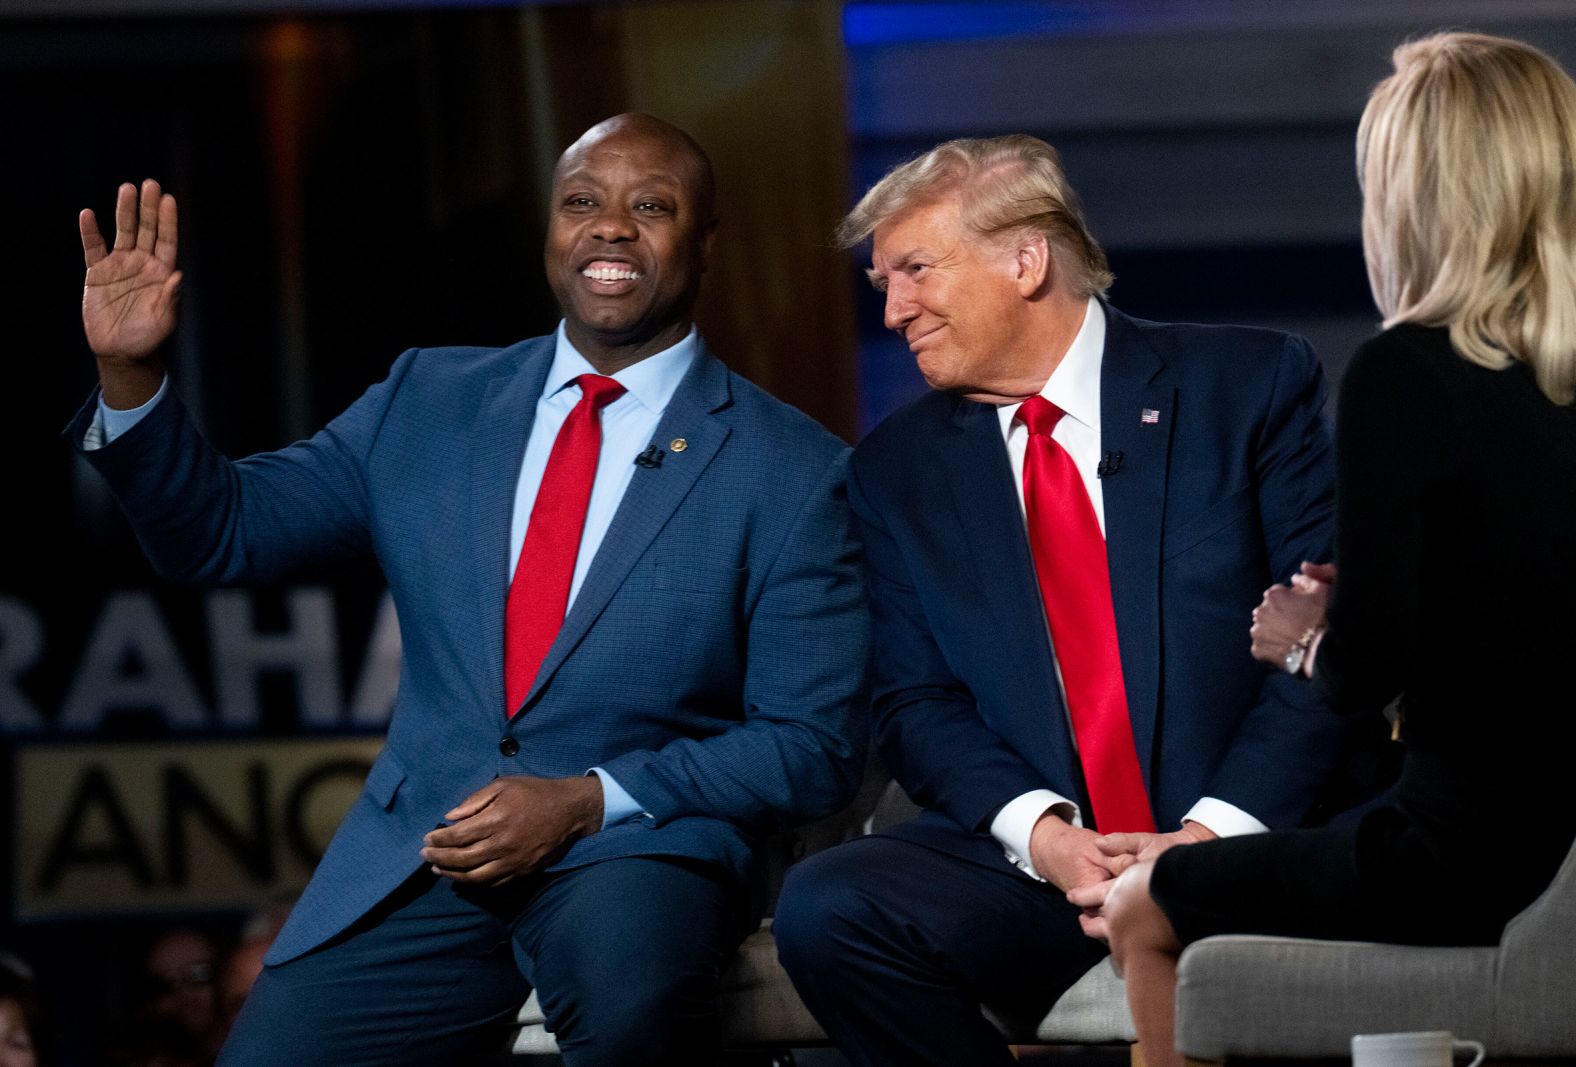 Scott joins Trump at a Fox News town hall in Spartanburg, South Carolina, in February 2024. After Scott dropped out of the presidential race in November 2023, <a href="https://www.cnn.com/2024/02/23/politics/tim-scott-trump-haley-south-carolina/index.html" target="_blank">he would go on to endorse Trump</a>.